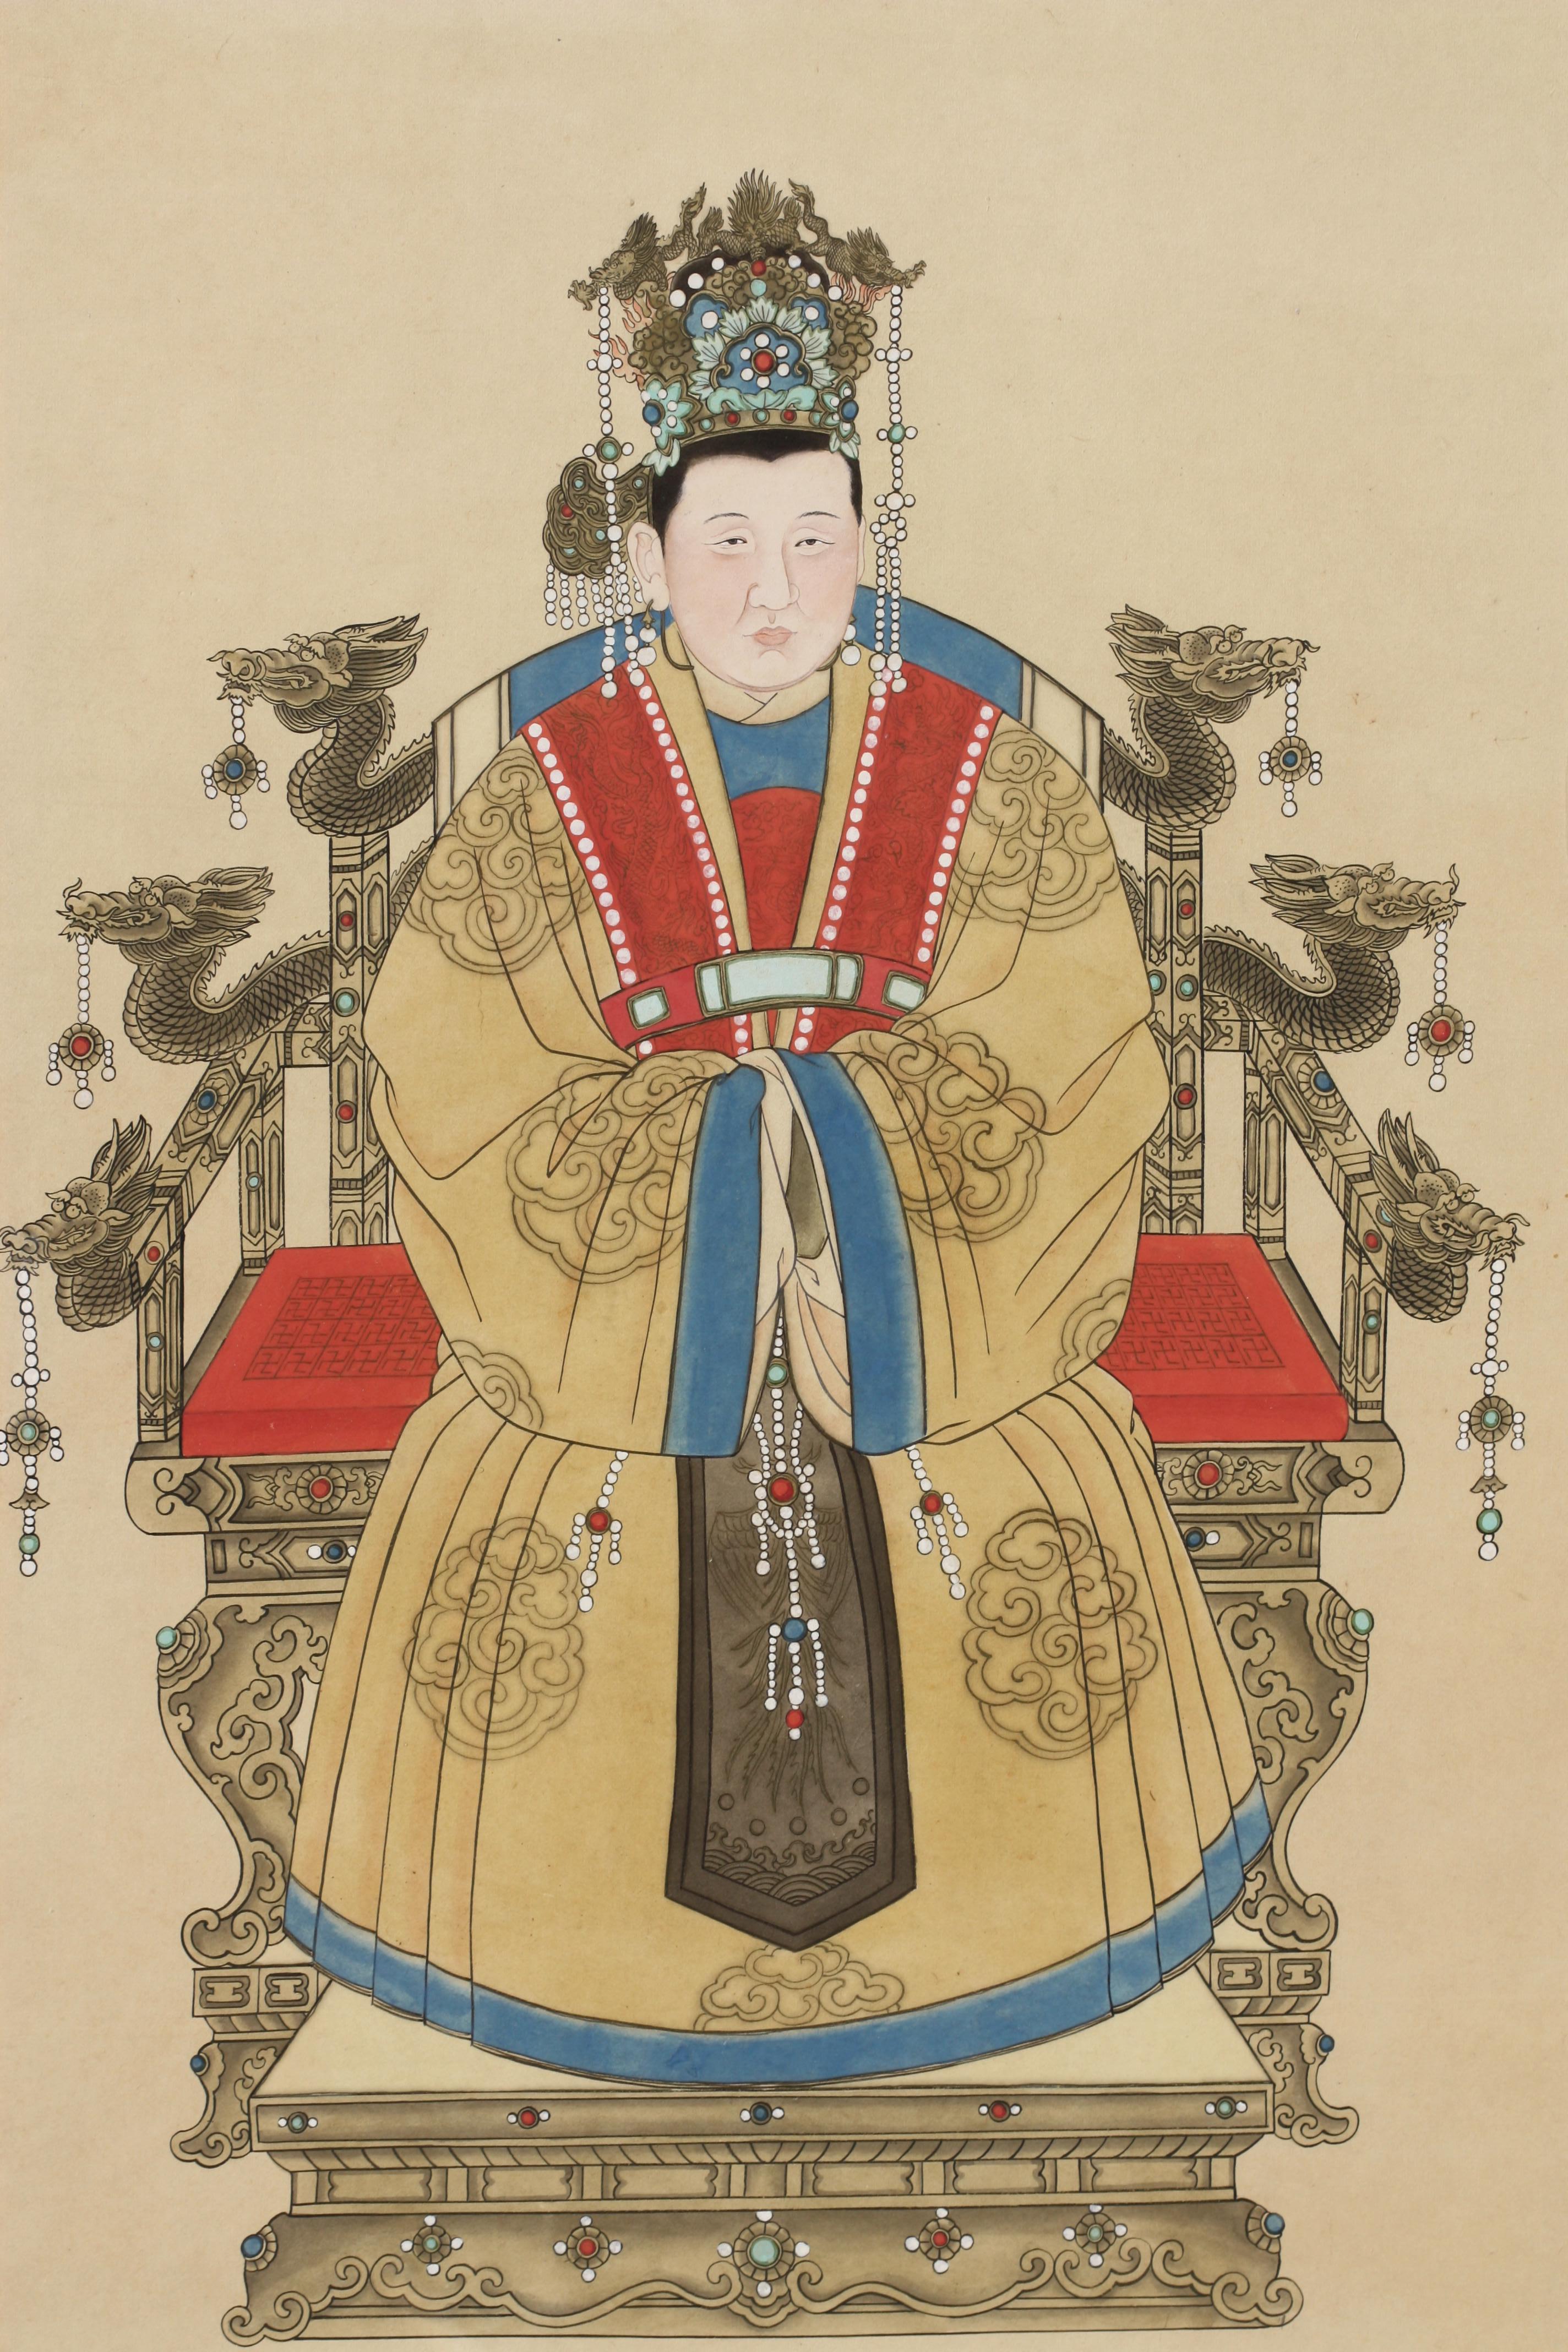 Portraits of a Ming dynasty Emperor and Empress, Chinese
ink and color on paper,
Measures: Framed: Height 50 in. (127 cm.), width 31.5 in. (80.01 cm.)
Without frame: Height 38.5 in. (97.79 cm.), width 24.5 in. (62.23 cm.)

    